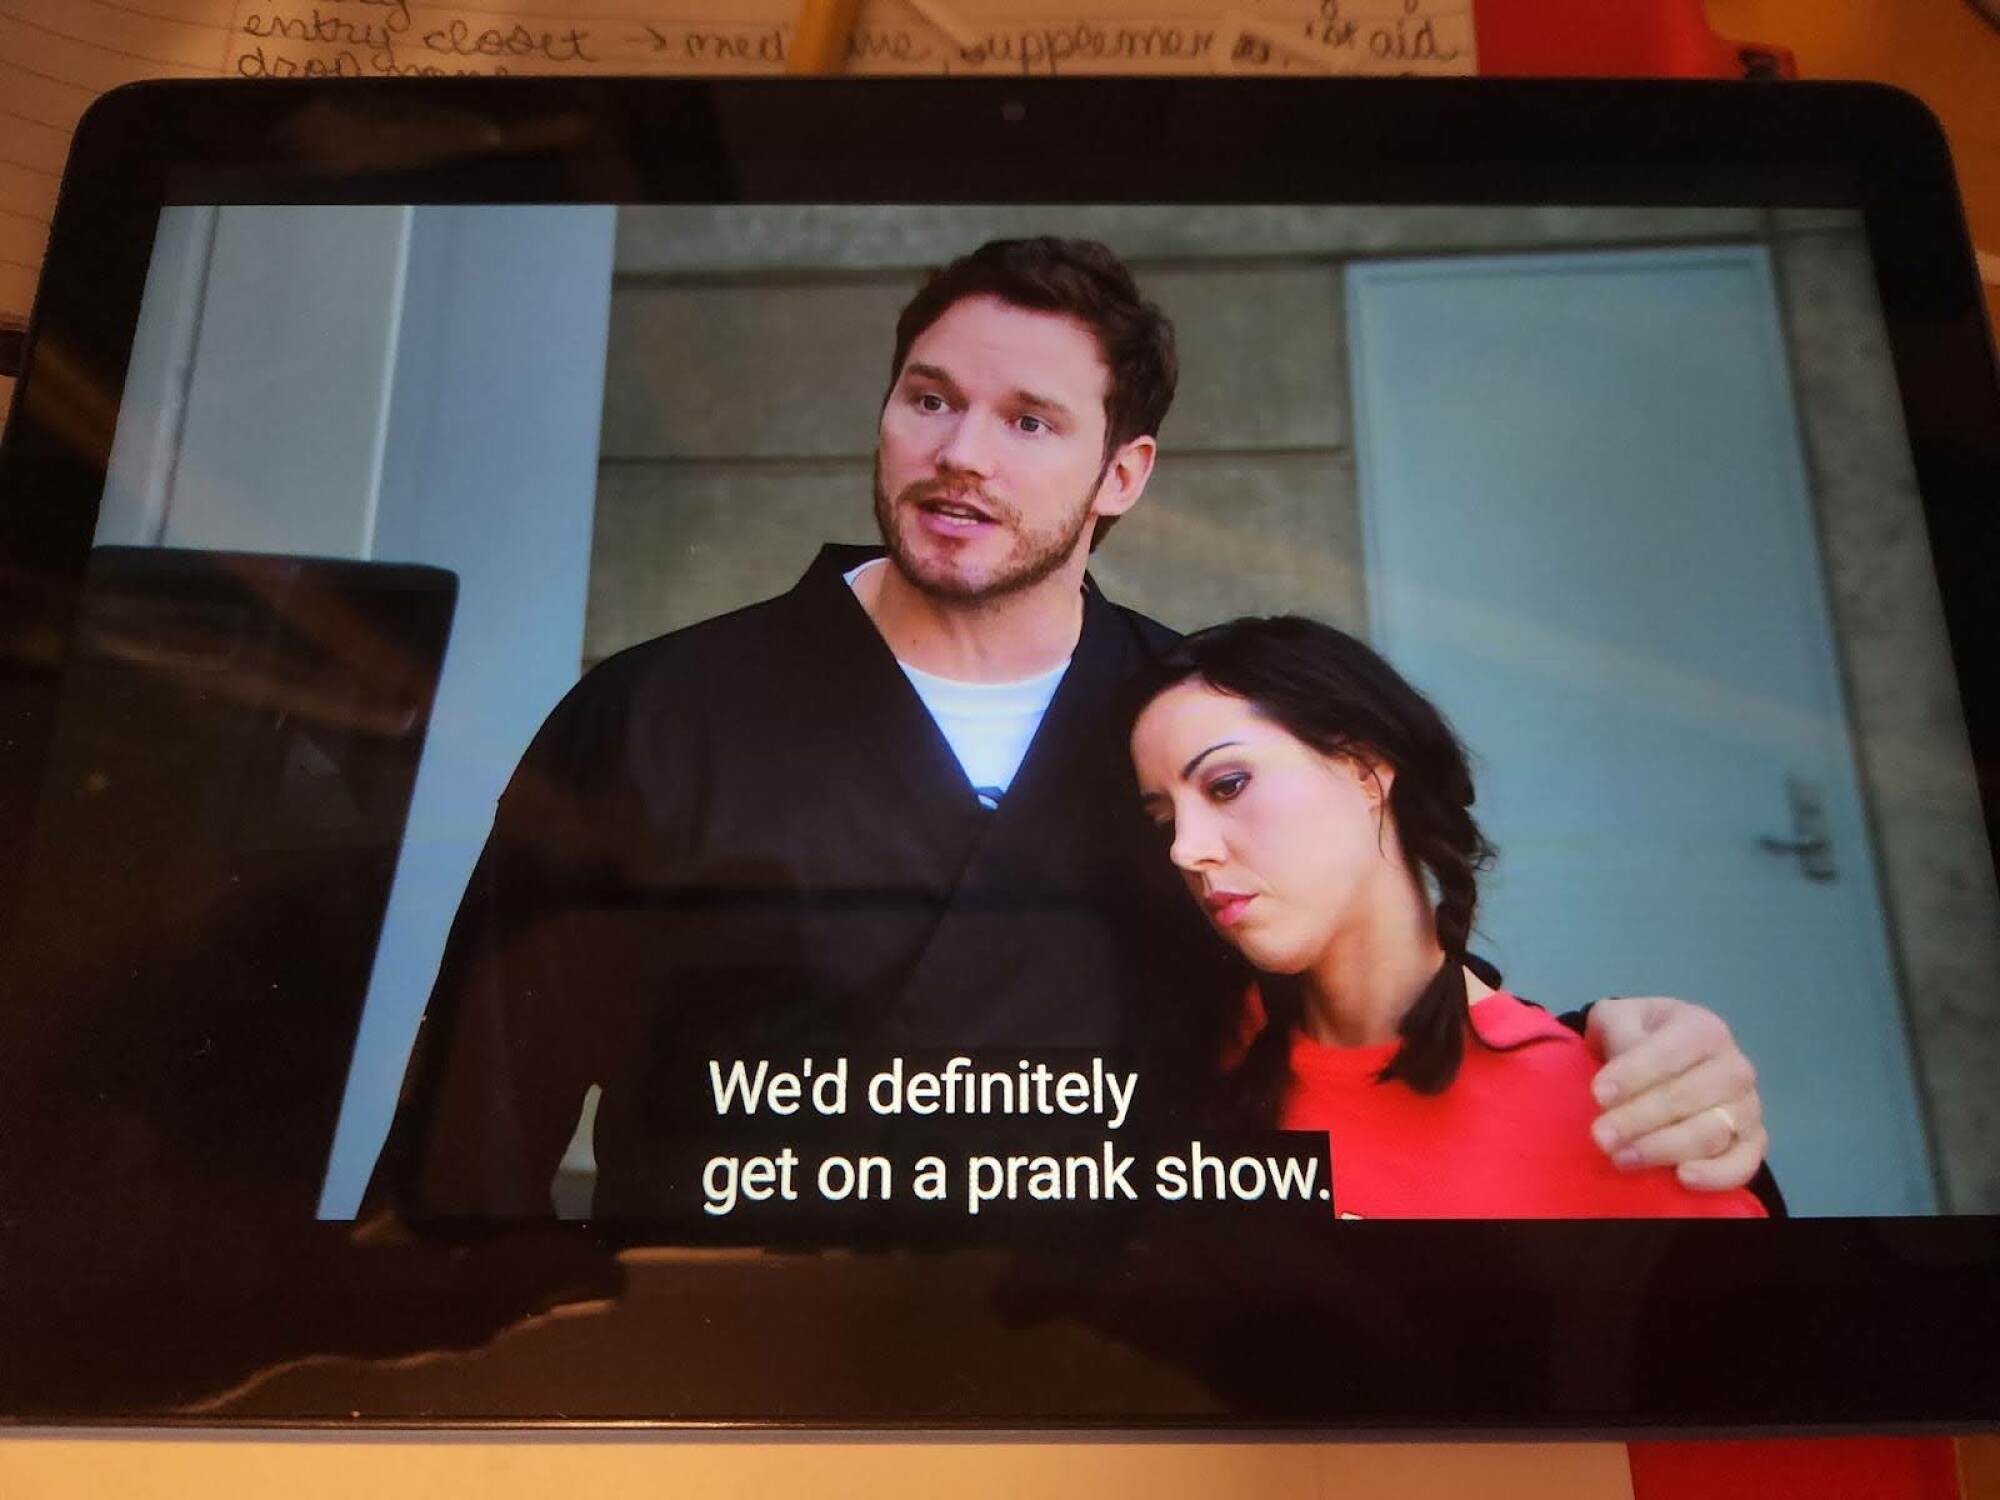 parks and recreation playing on the amazon fire hd 10 tablet